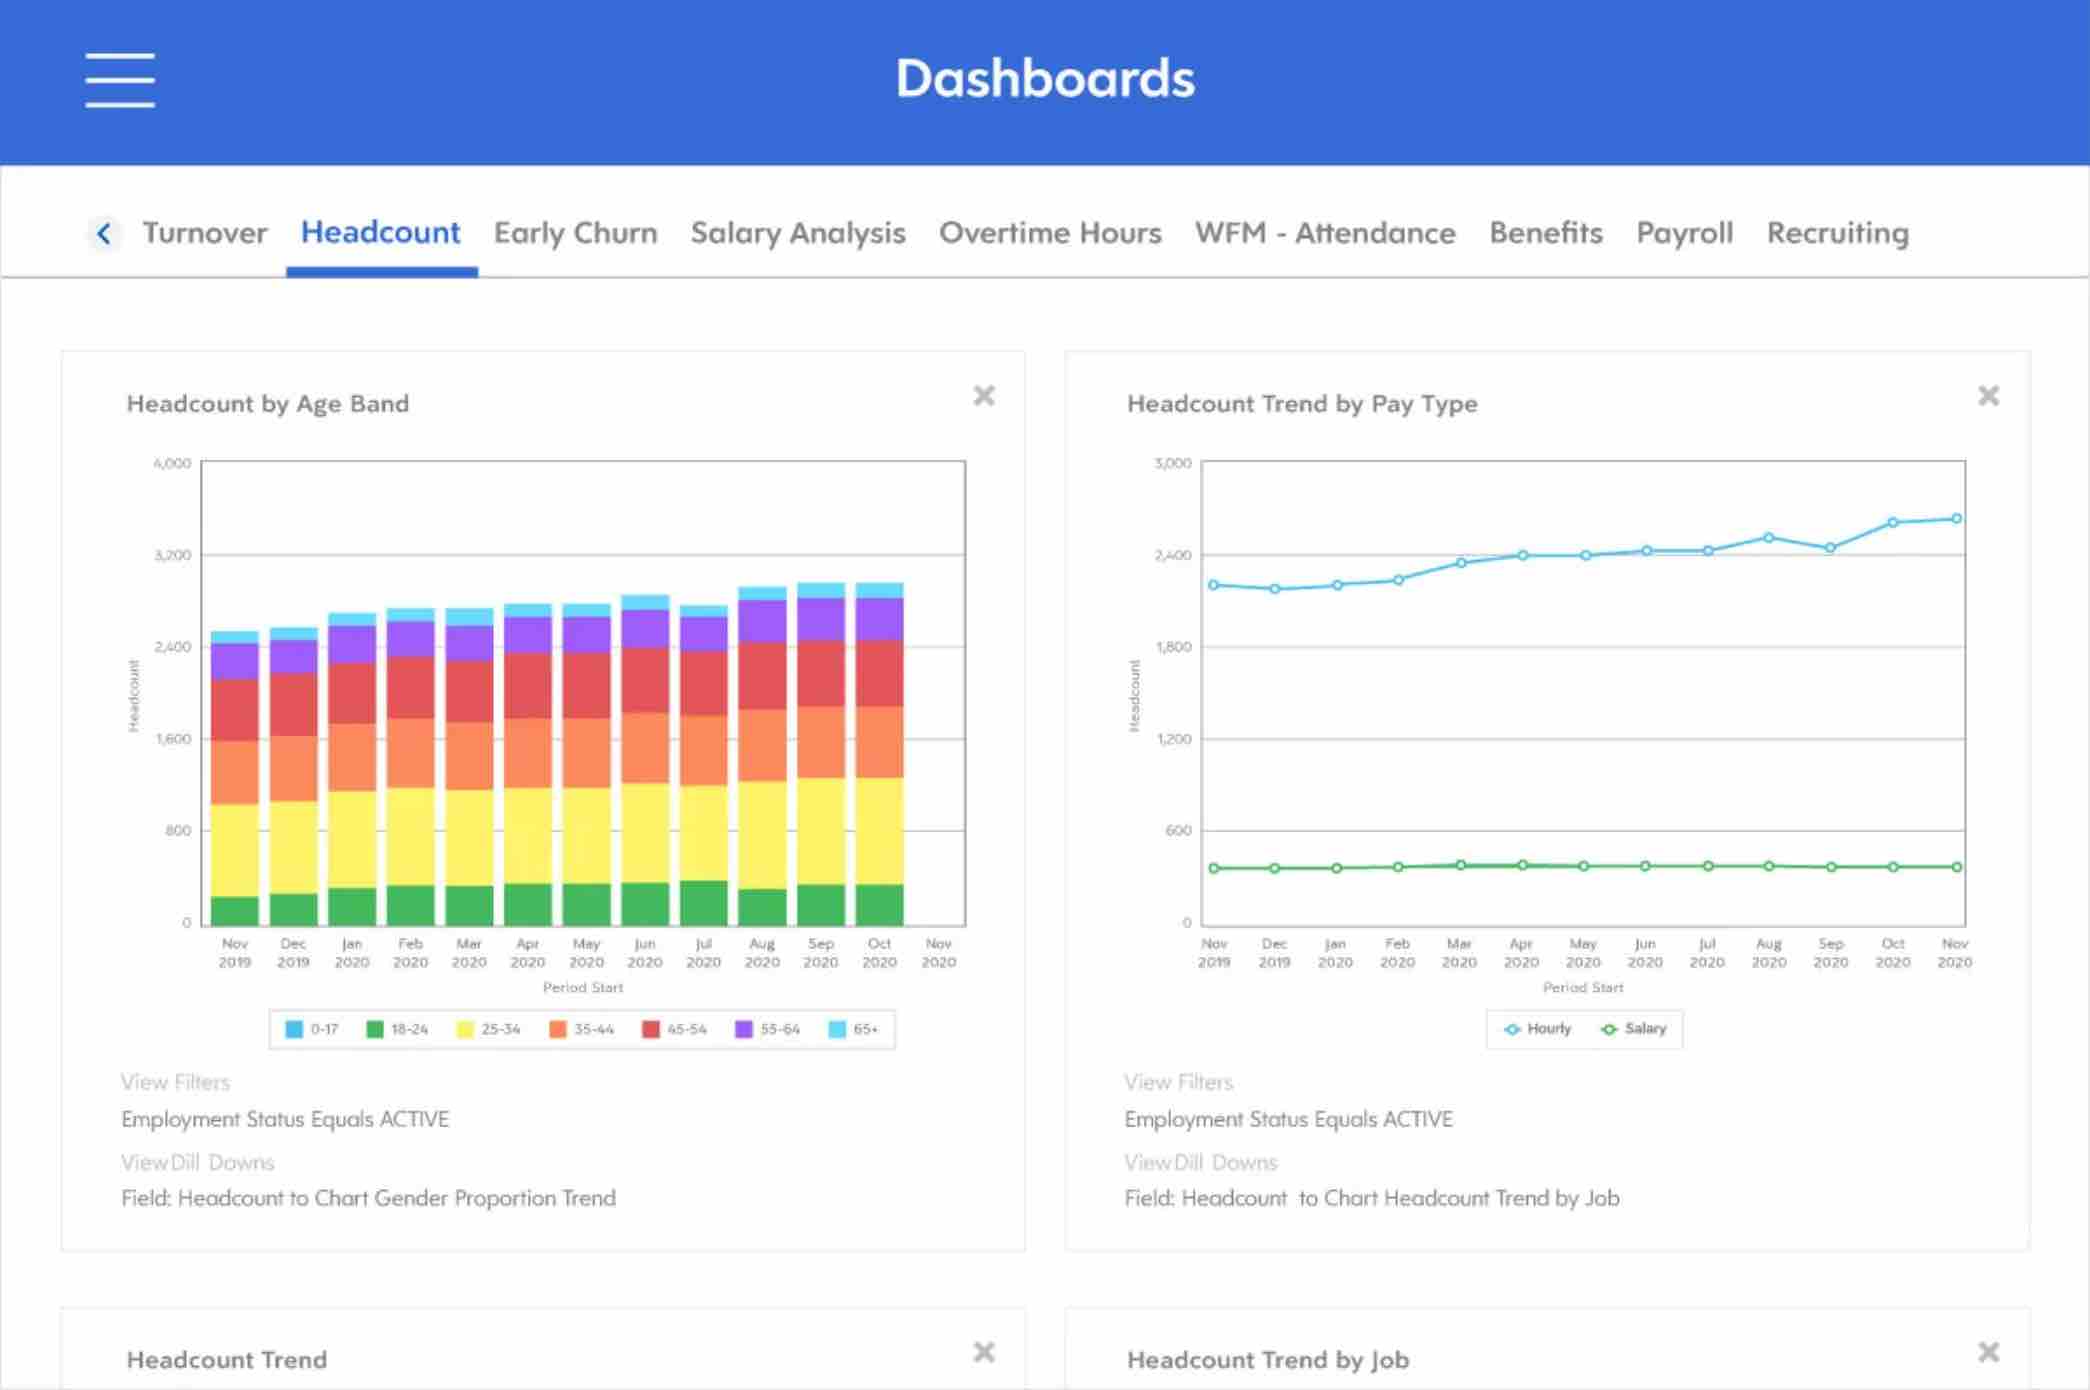 Our reviewer took screenshot of Ceridian HRMS System dashboard during the demo